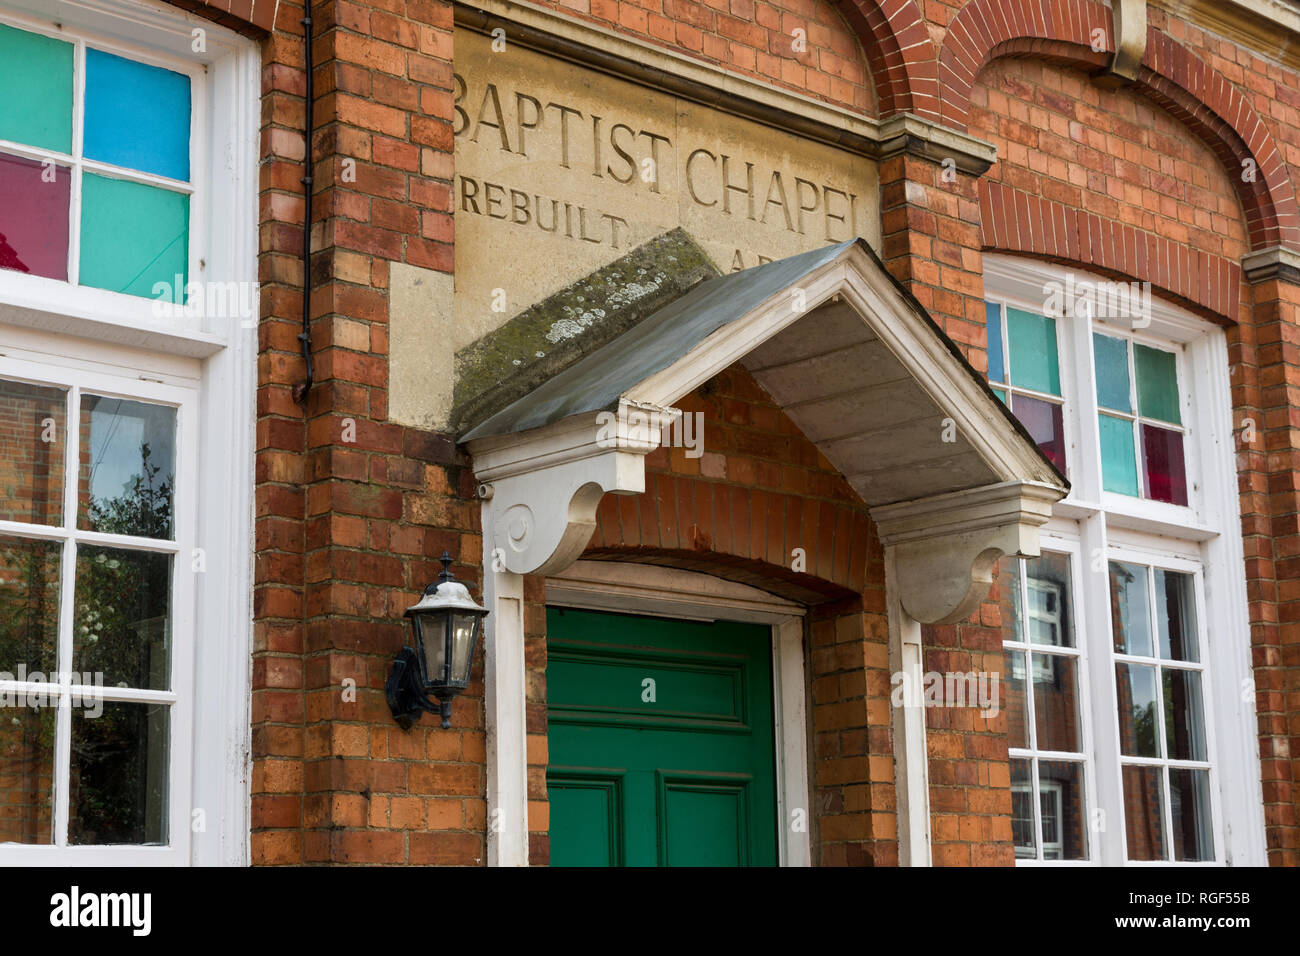 Frontage of the former Baptist Chapel in the village of Rothersthorpe, Northamptonshire, UK; dating from 19th century and now a private house. Stock Photo